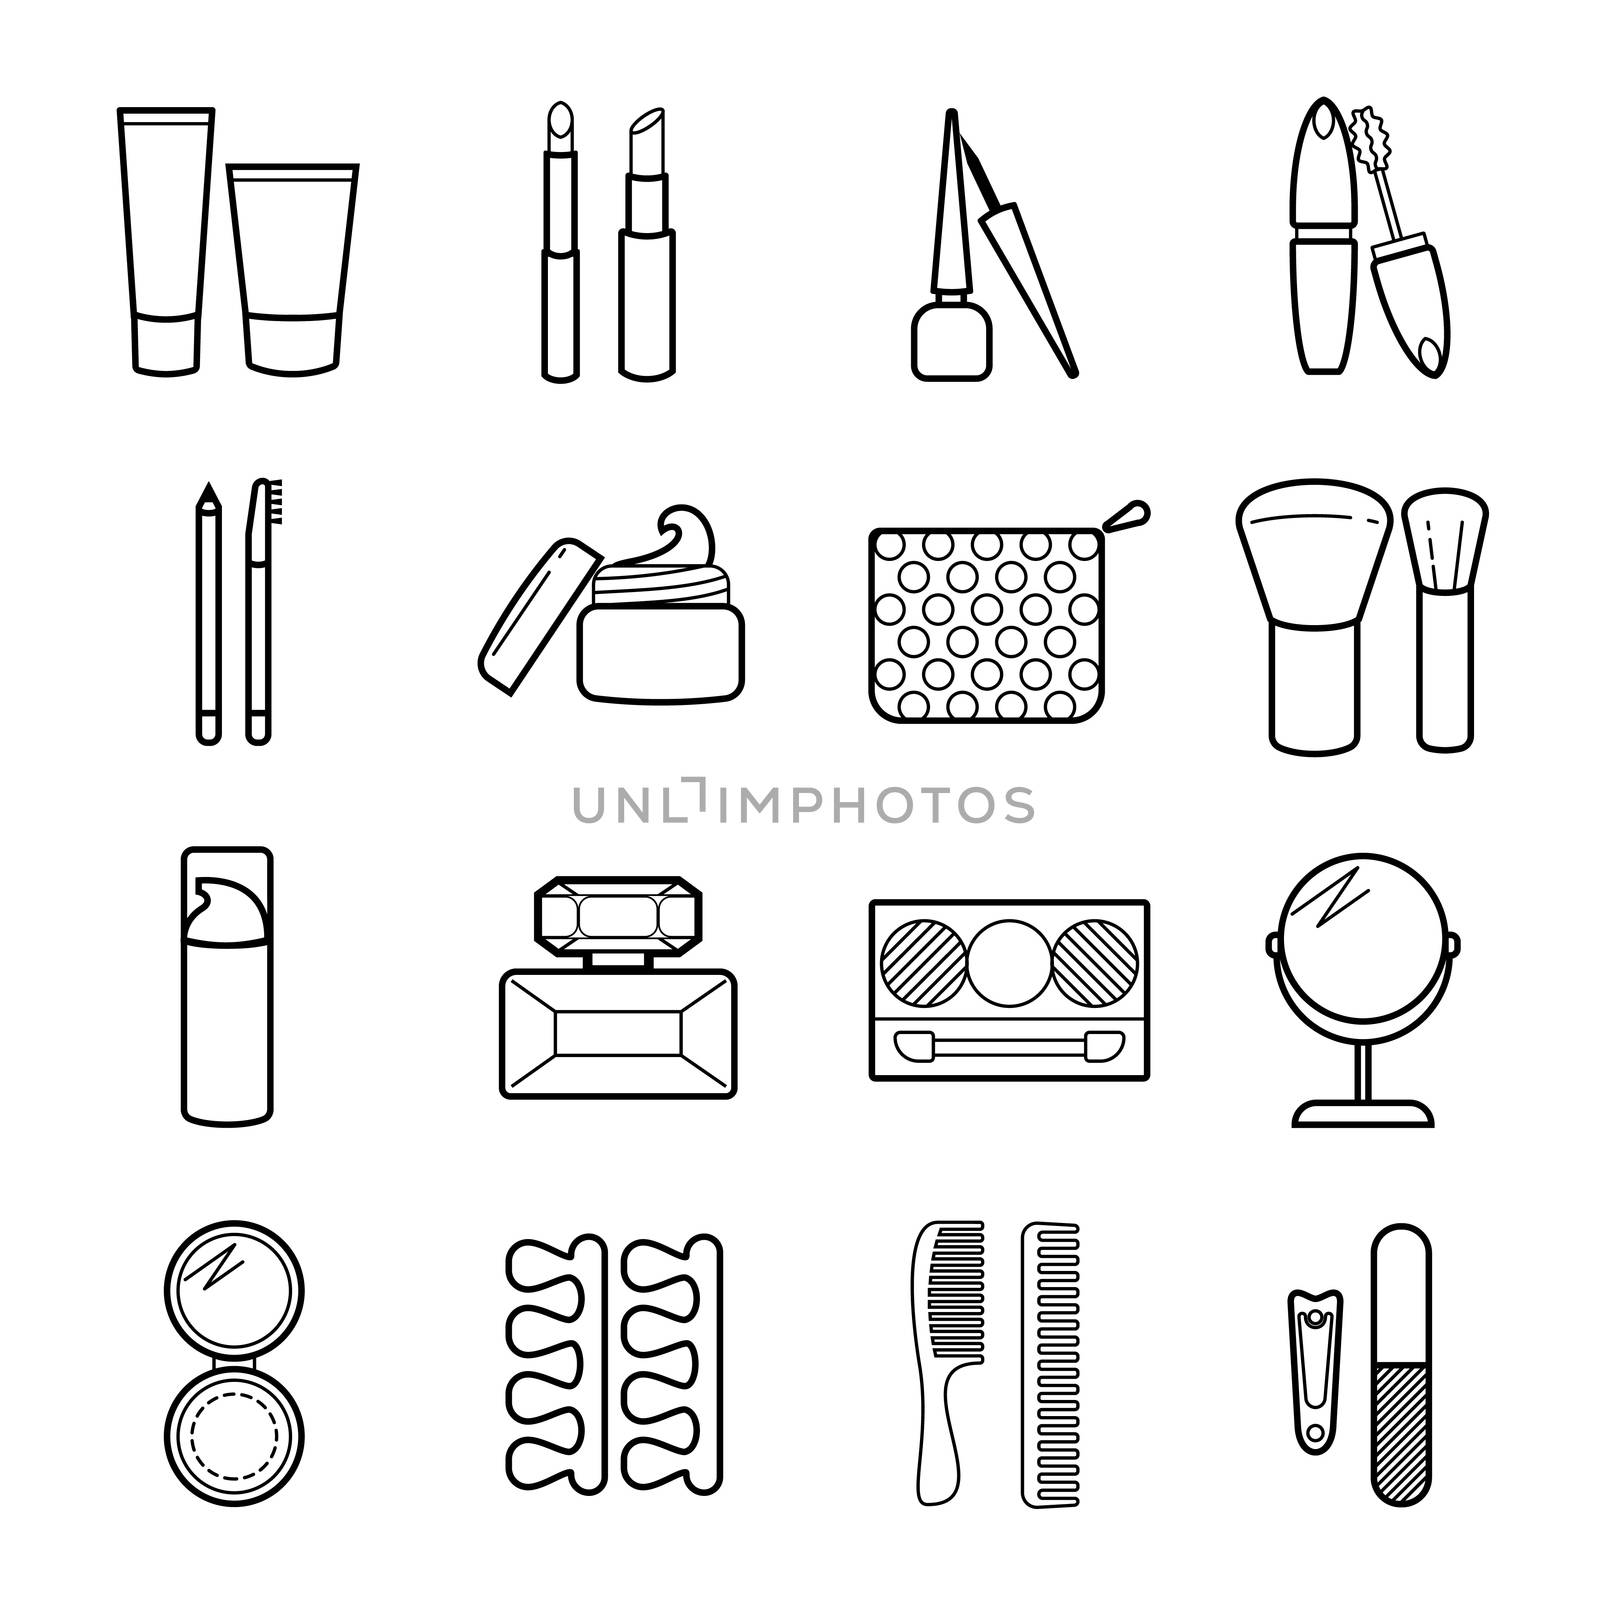  cosmetic icons set. Make-up illustrations. For the design of business cards, invitations, flyers, postcards, websites, etc